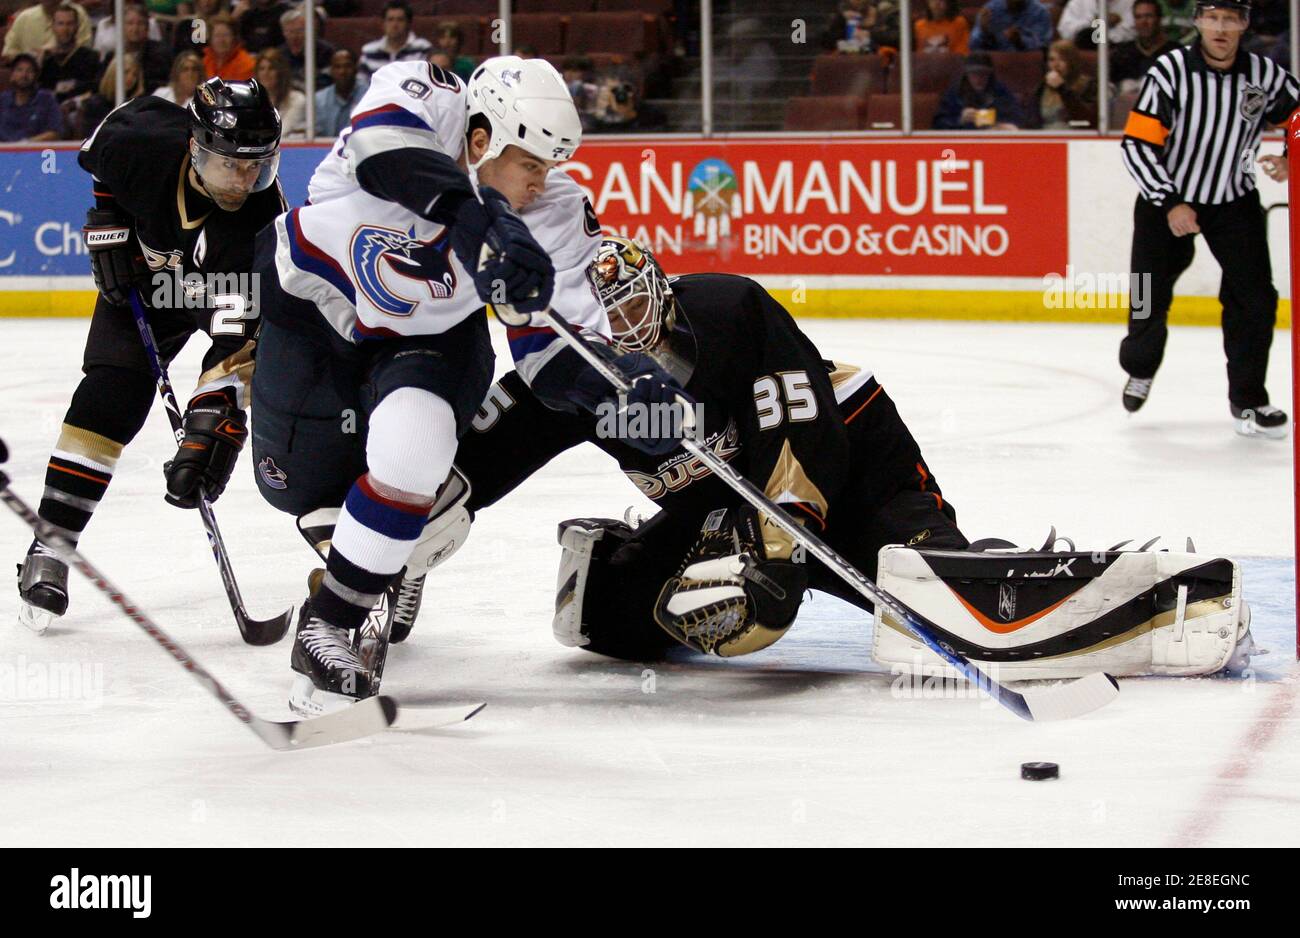 Vancouver Canucks' Taylor Pyatt (C) tries to get one past Anaheim Ducks goalie Jean-Sebastien Giguere (R) during the first period of their NHL hockey game in Anaheim March 11, 2007. REUTERS/Gus Ruelas (UNITED STATES) Stock Photo